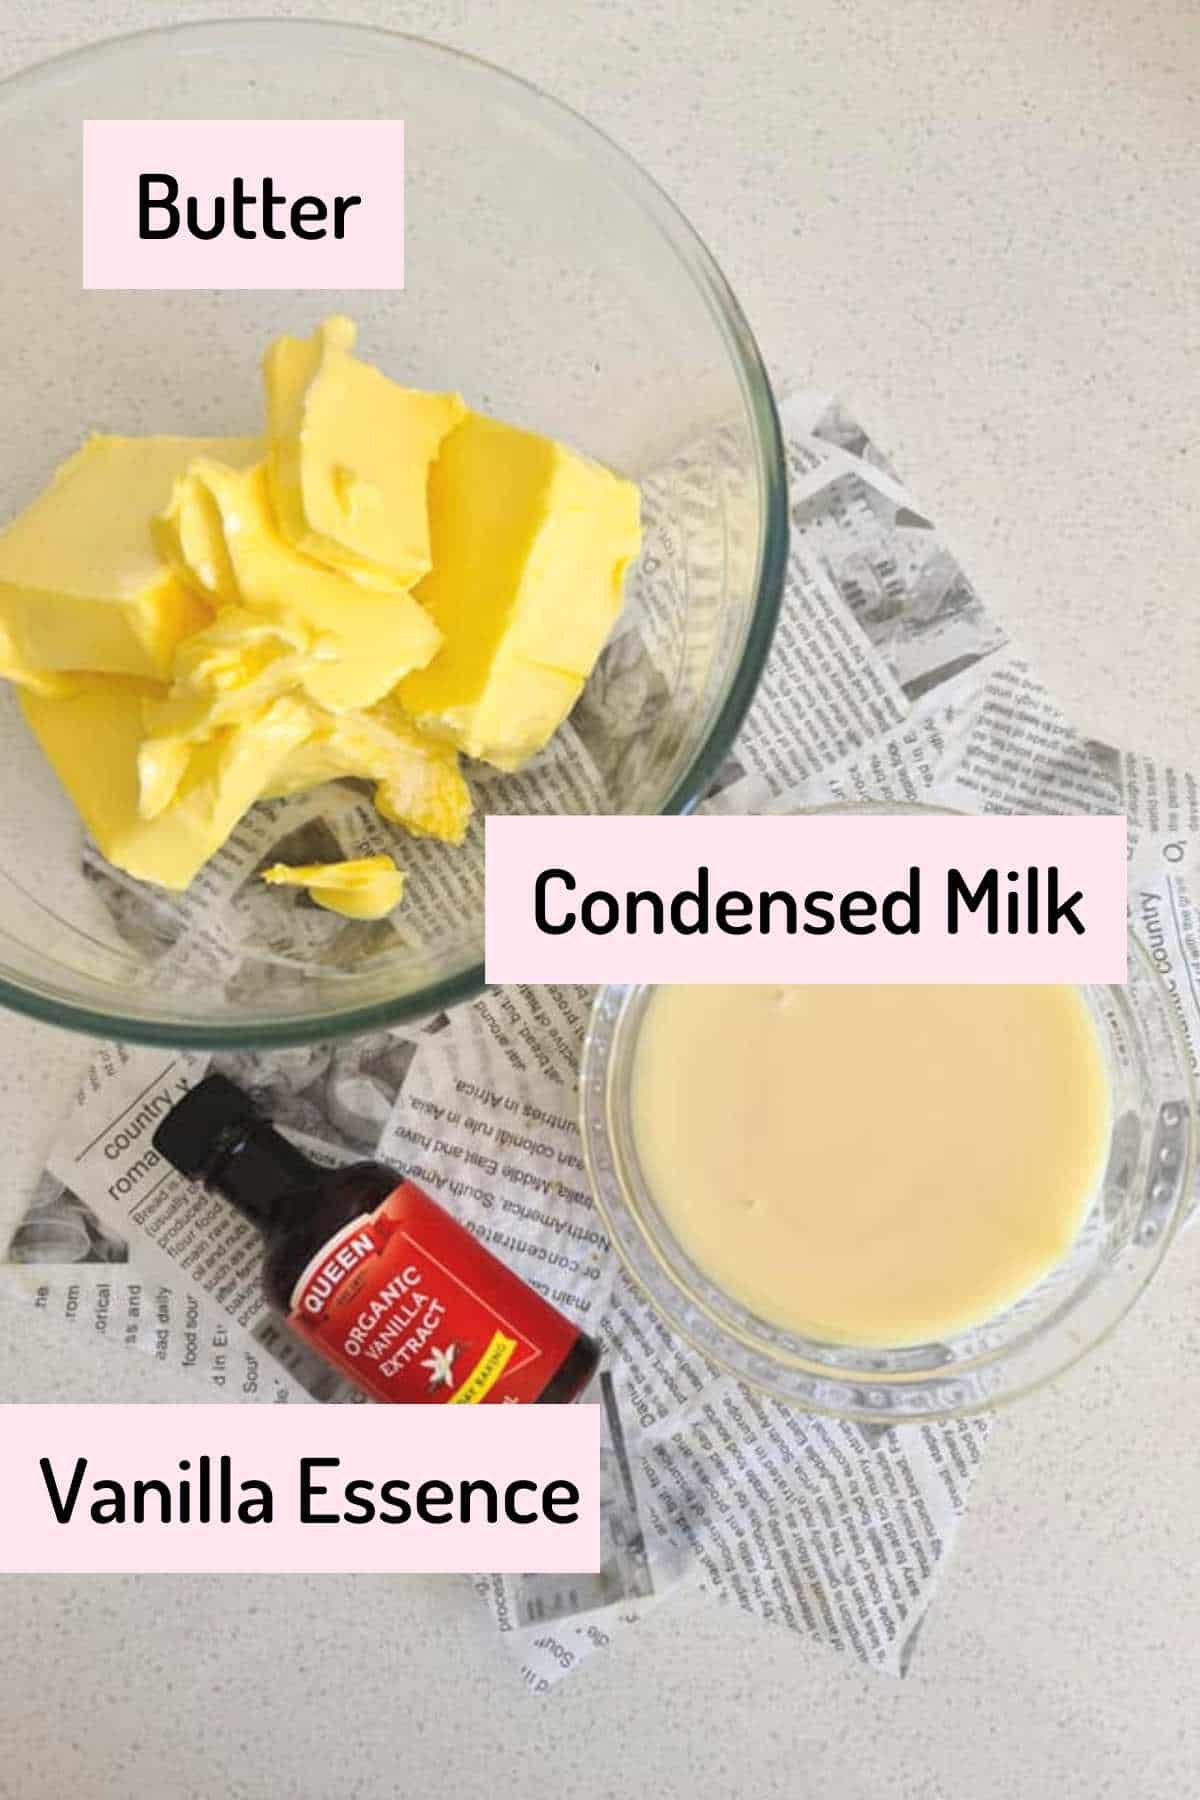 ingredients needed to make buttercream